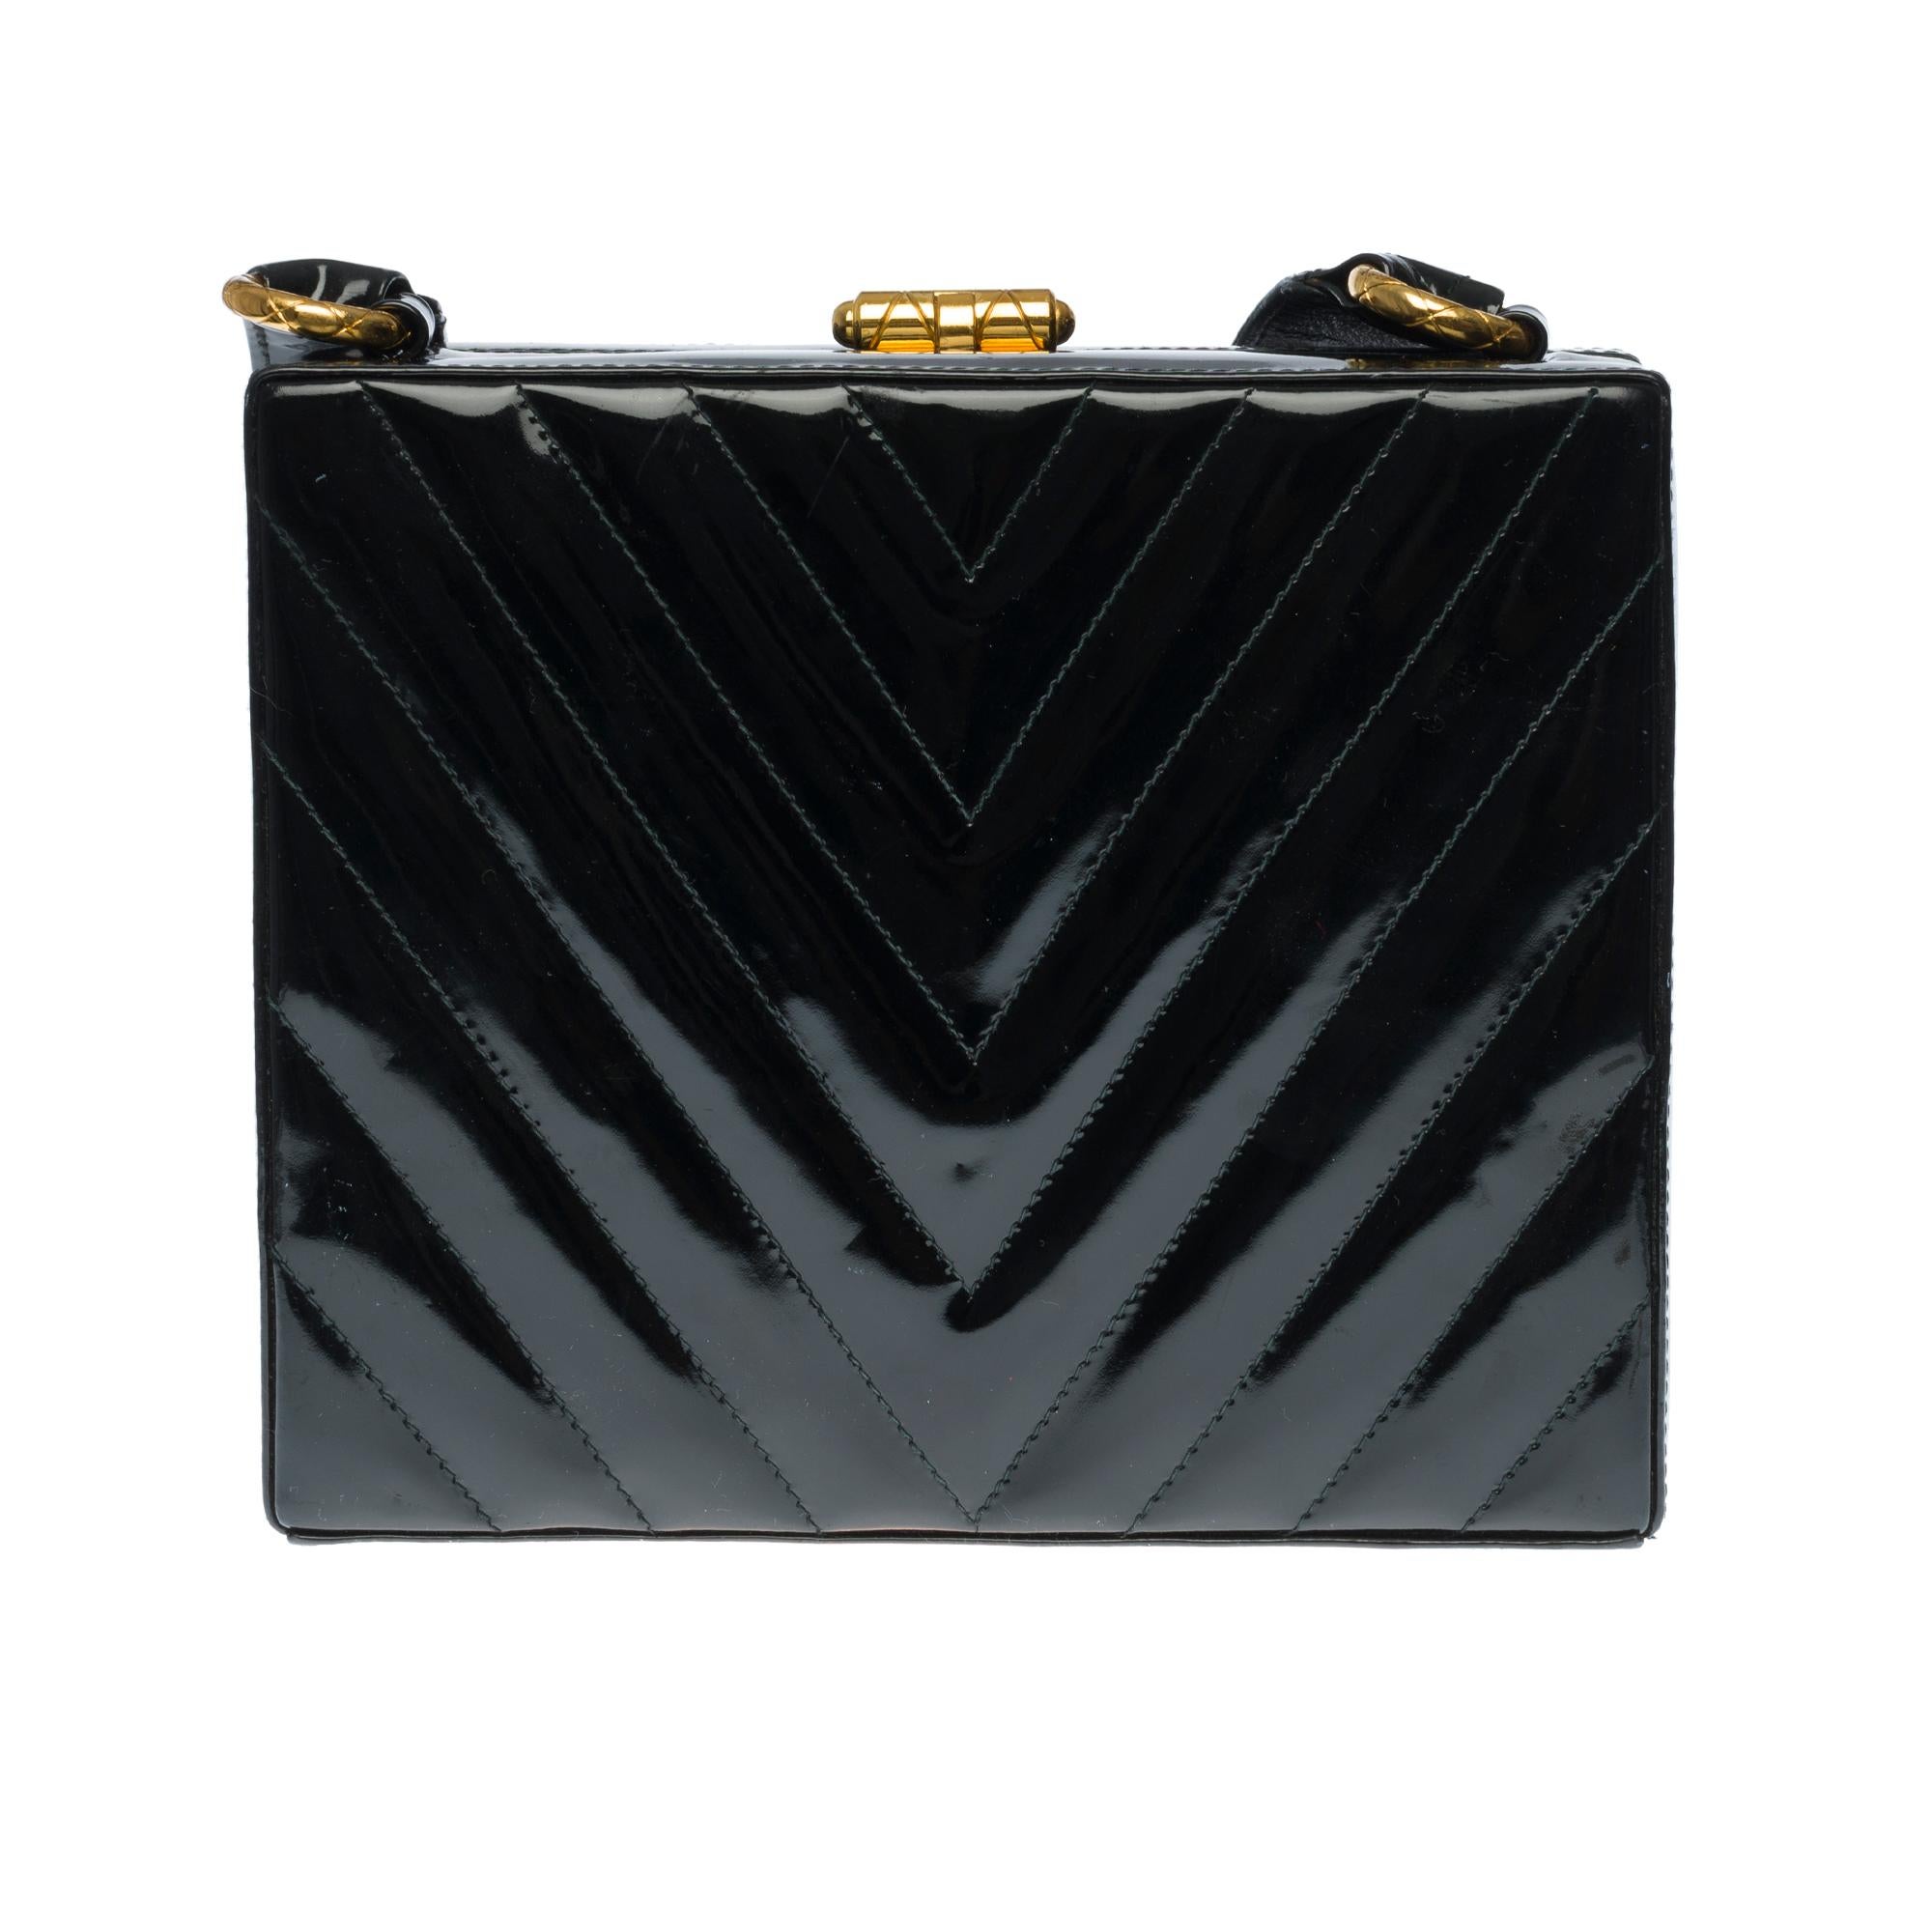 Chic Vanity Case Chanel in black patent herringbone quilted leather, gold metal trim, black varnished leather shoulder strap.

Lining in black leather, one patch pocket.

